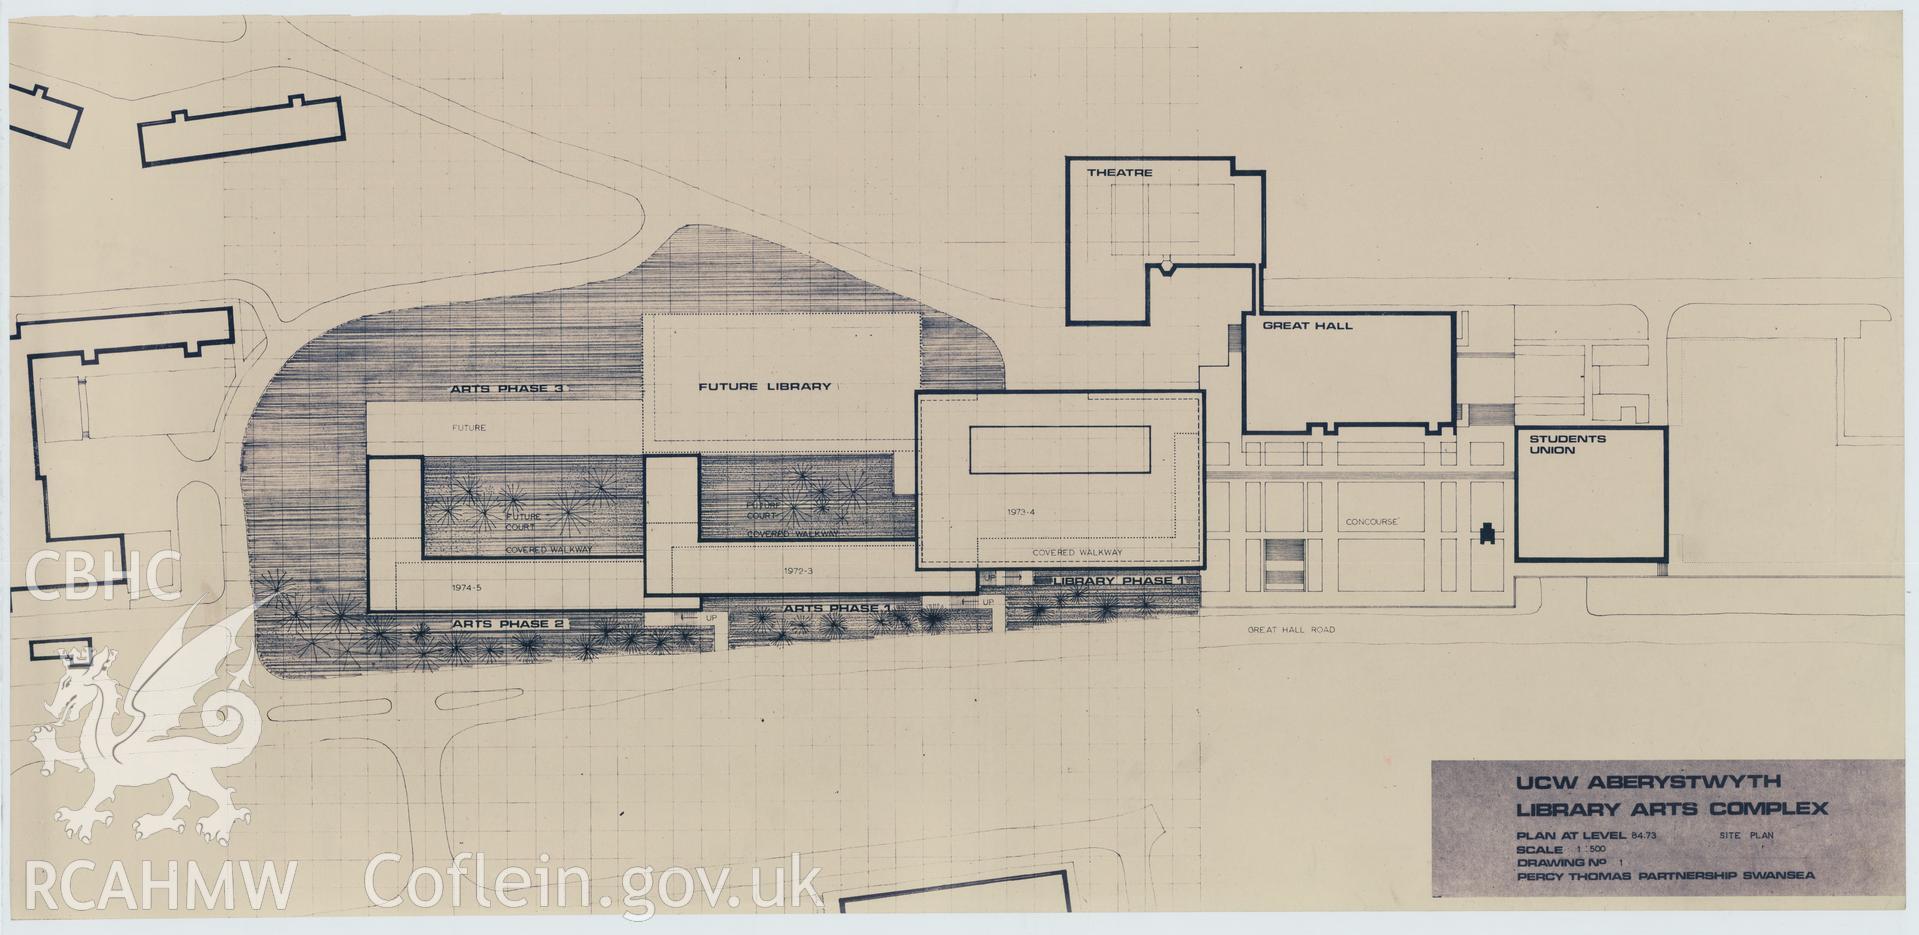 Digital copy of Drawing No 1, site plan of the proposed Library Arts Complex at University College Aberystwyth, produced by Percy Thomas Partnership. Scale 1:500